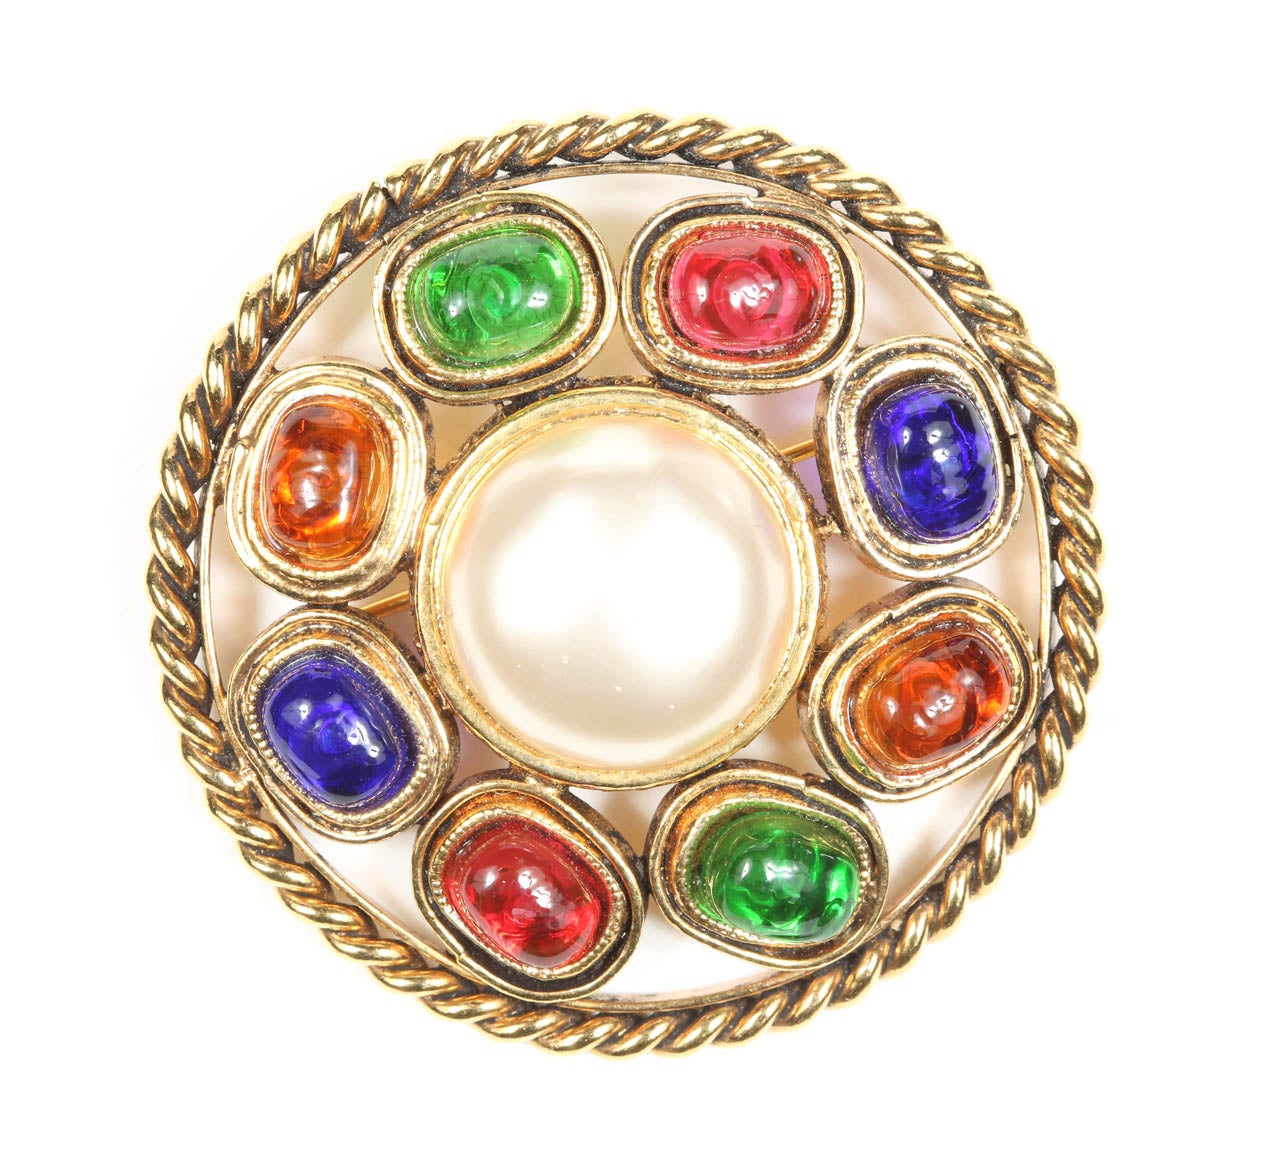 A colorful Chanel brooch with a ring of colorful poured glass cabochons around a central glass pearl and framed in a gilt metal rope. Marked on the back with the 